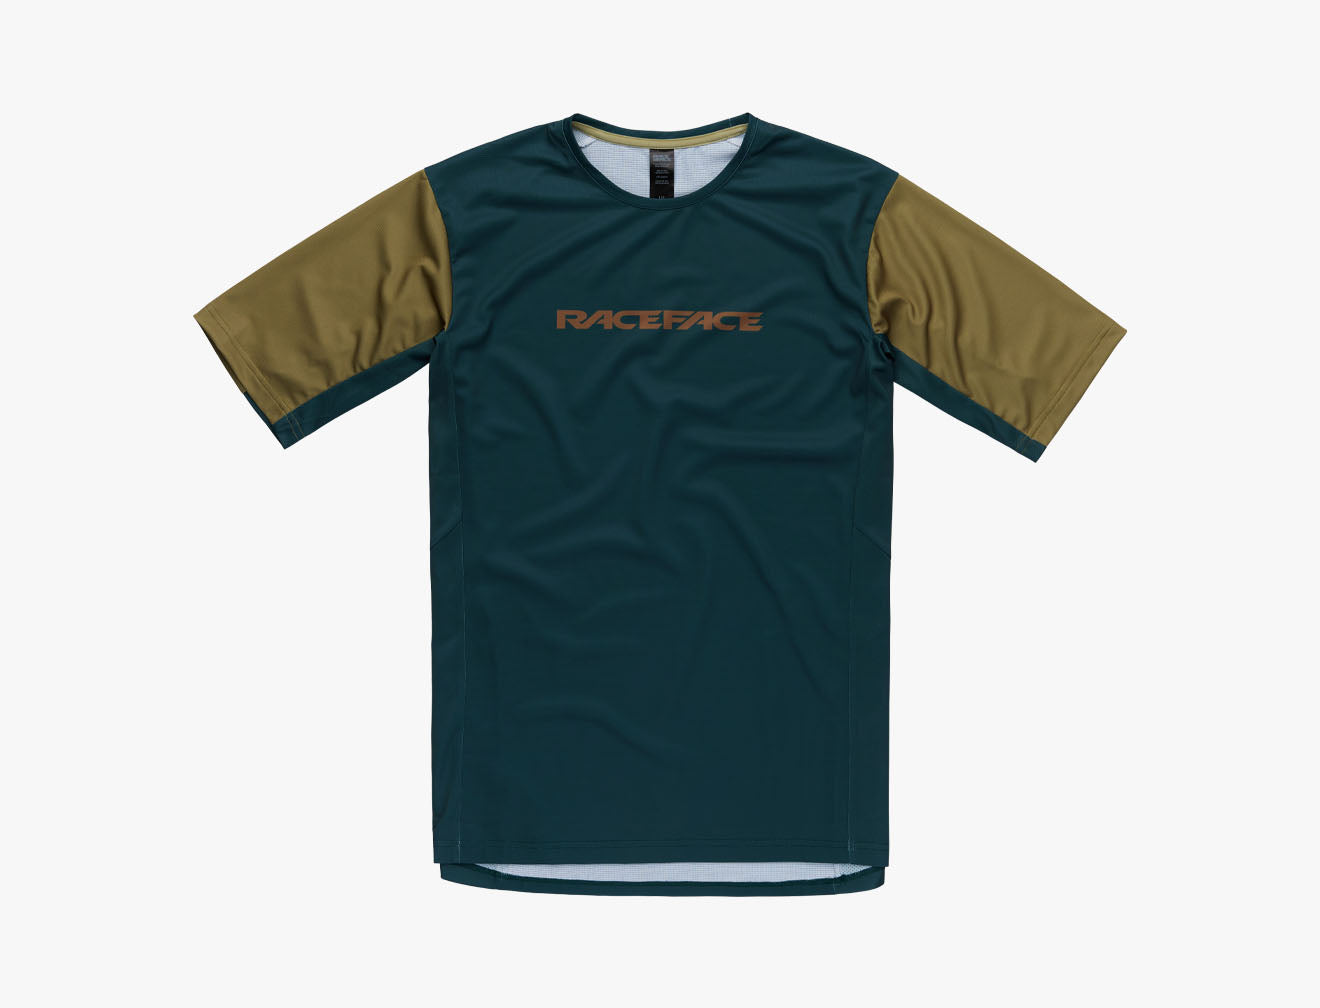 Indy_SS_Jersey_Pine_cardproduct_3x